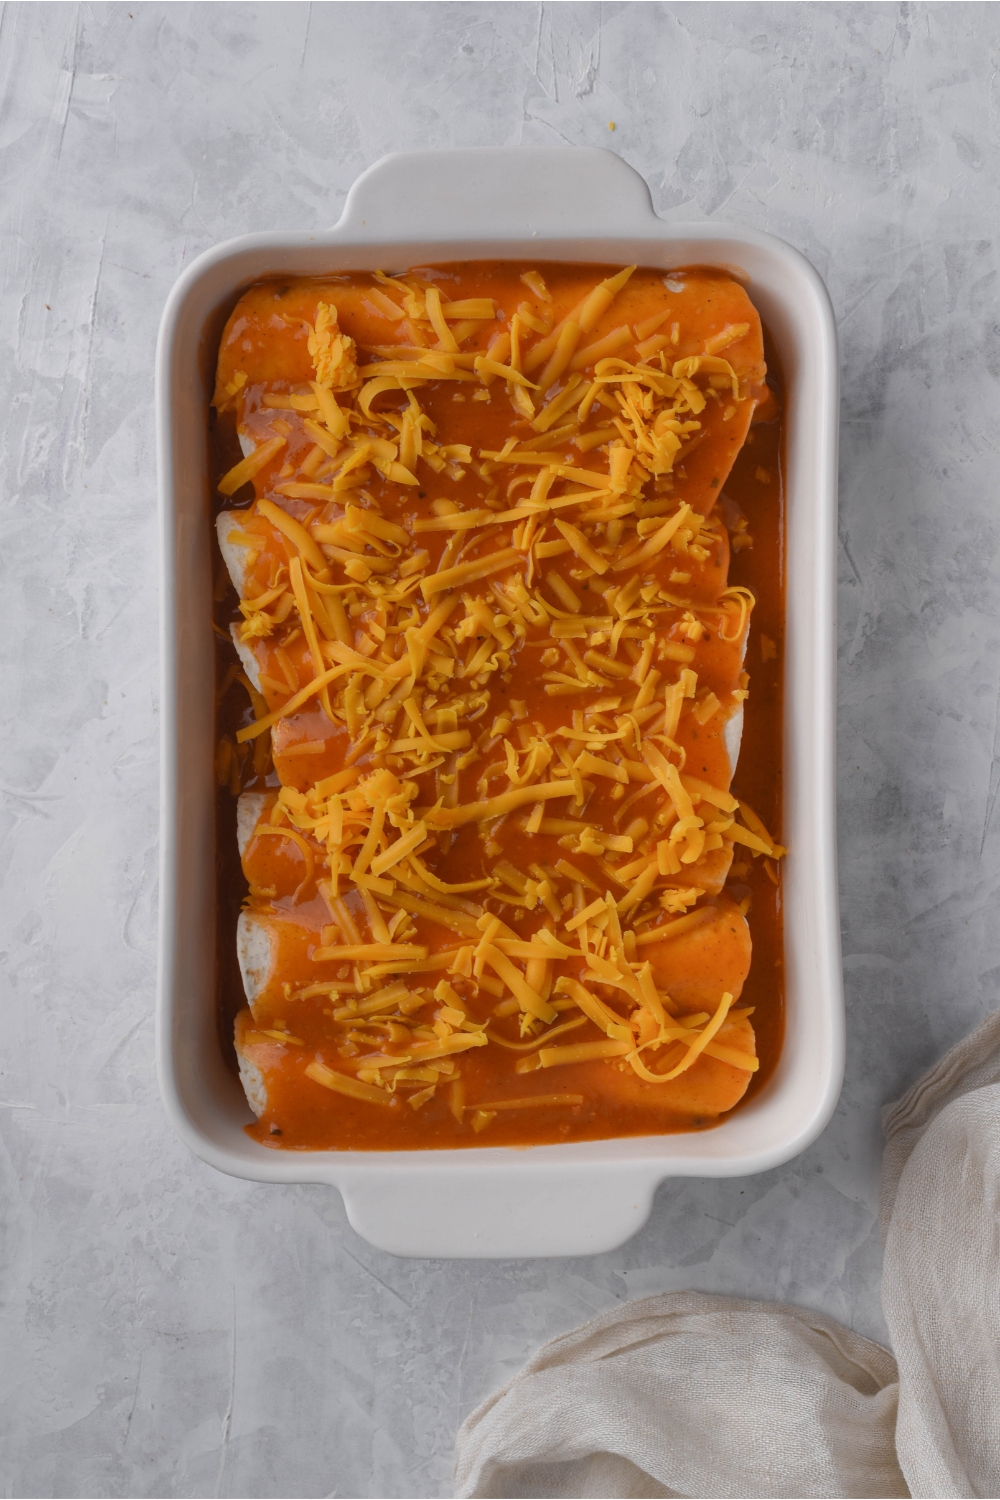 Unbaked cream cheese chicken enchiladas covered in enchilada sauce and shredded cheese.